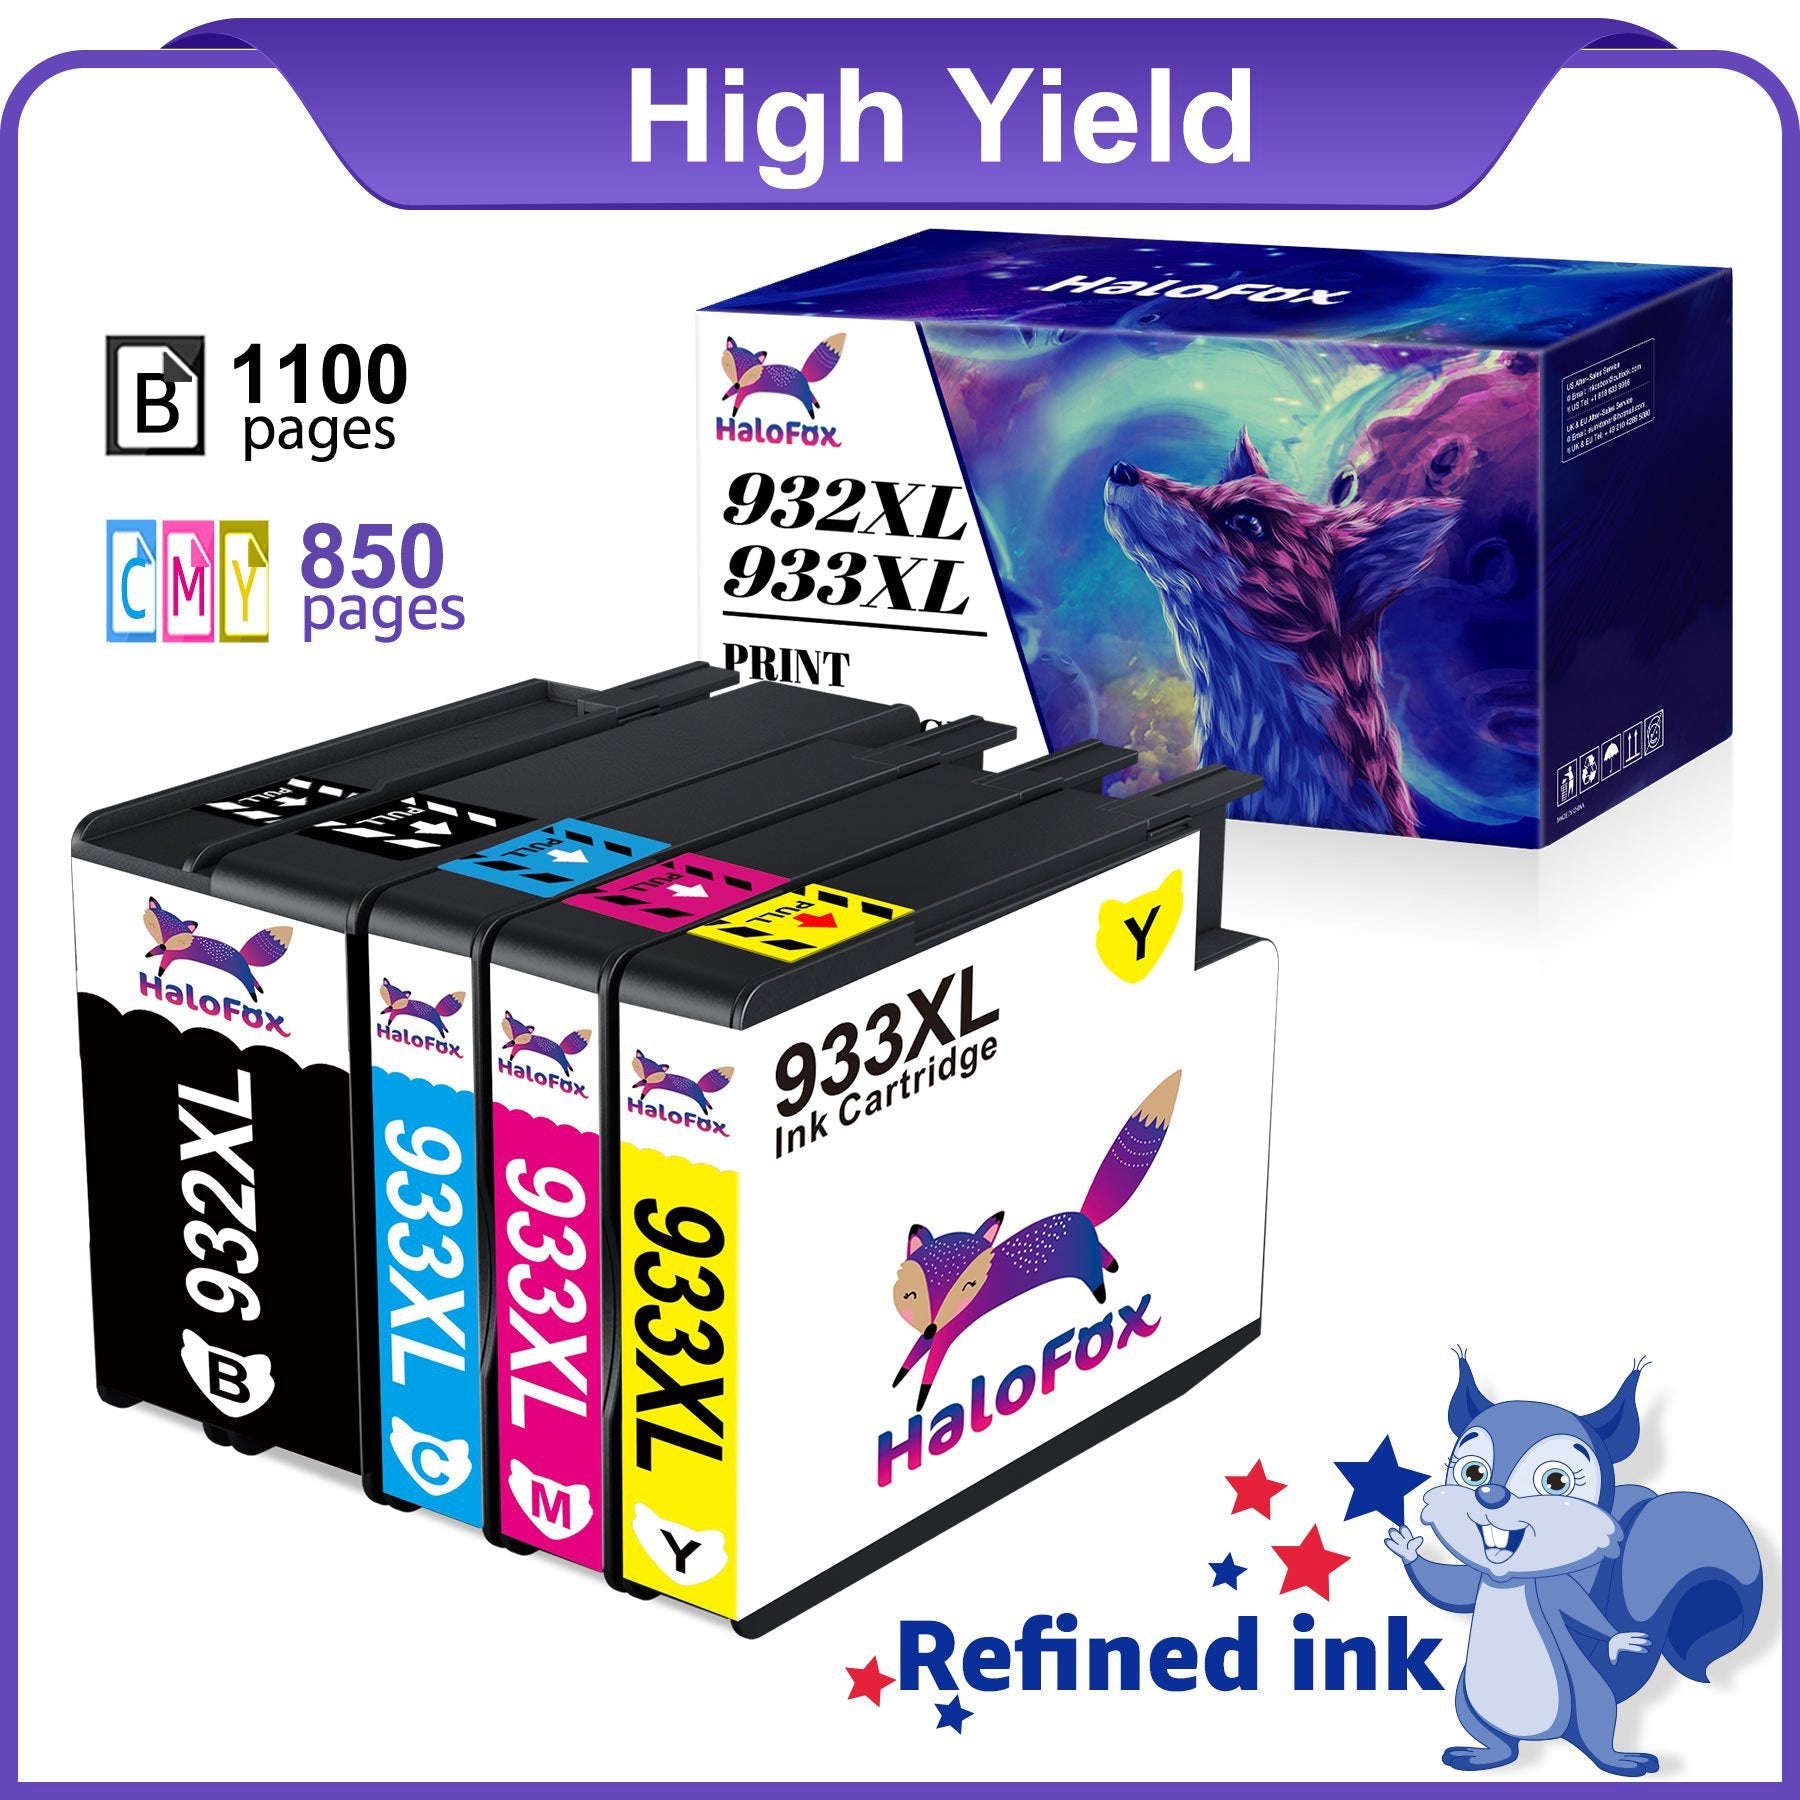 Halofox 932XL Black Ink and 933XL Color Multipack (4 Pack)